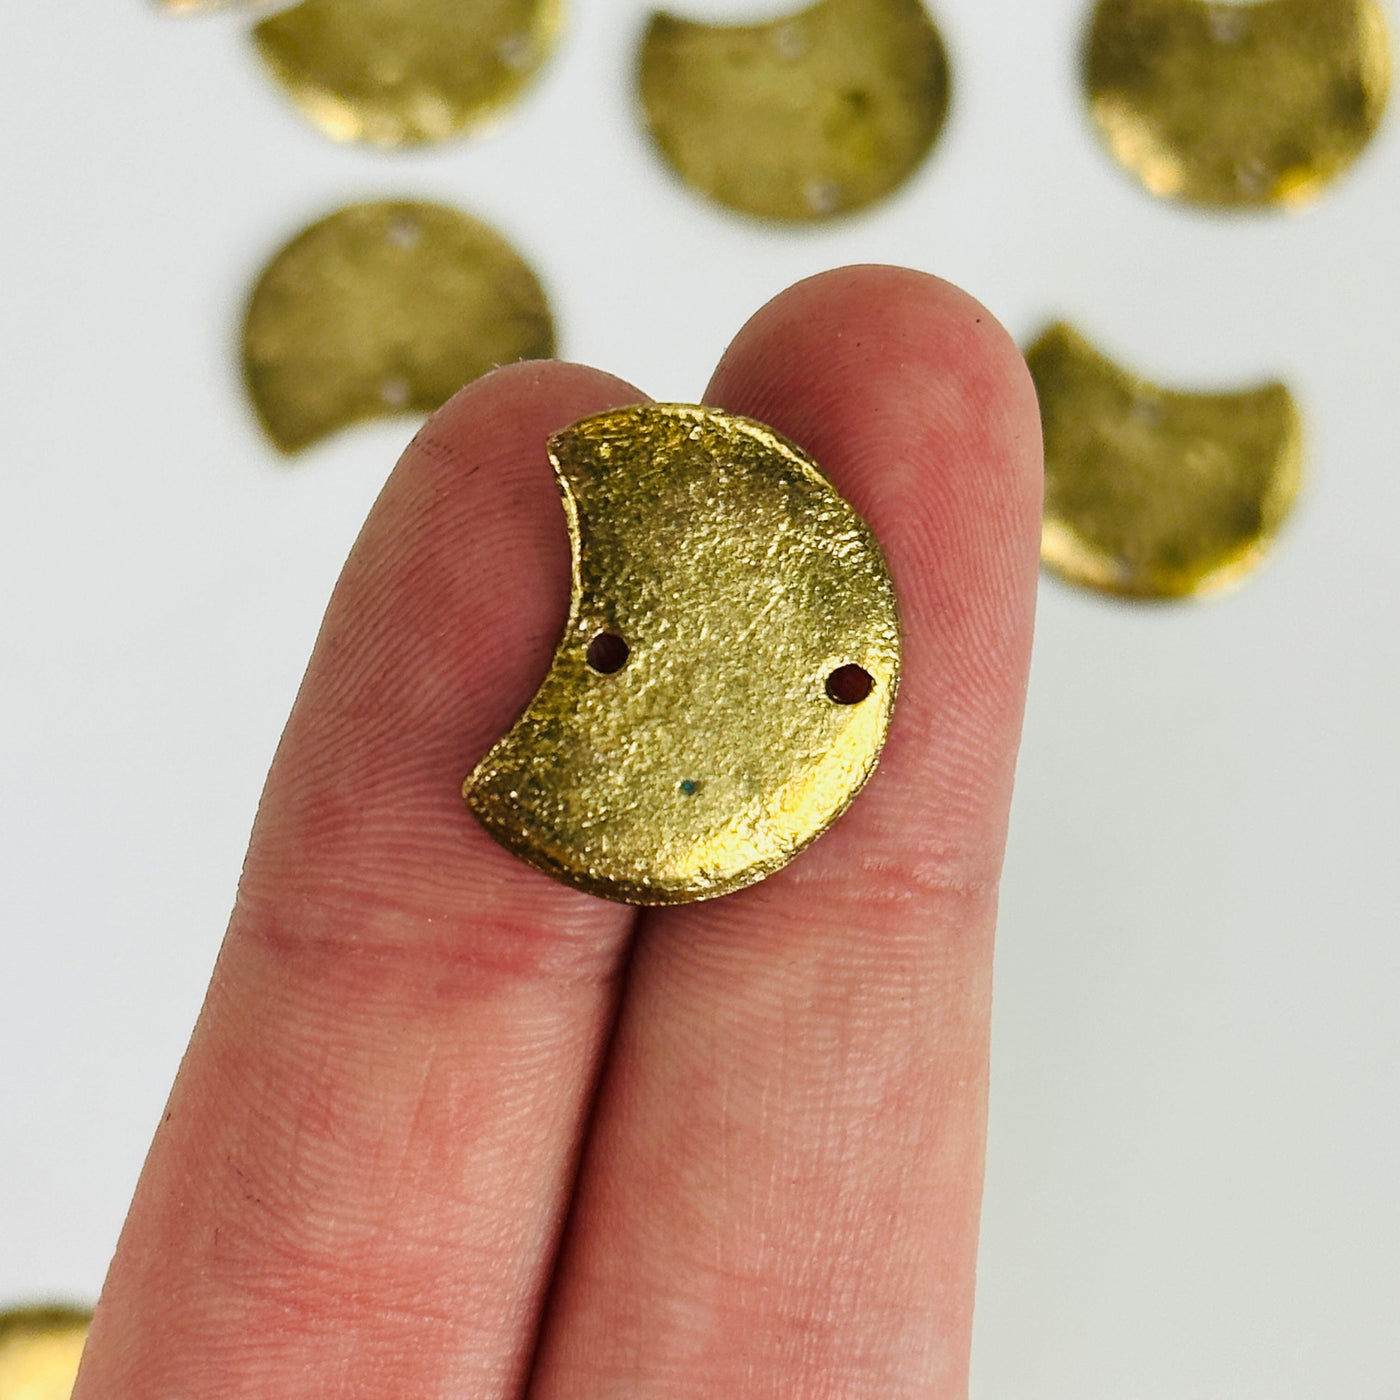 fingers holding up moon pendant with others in the background